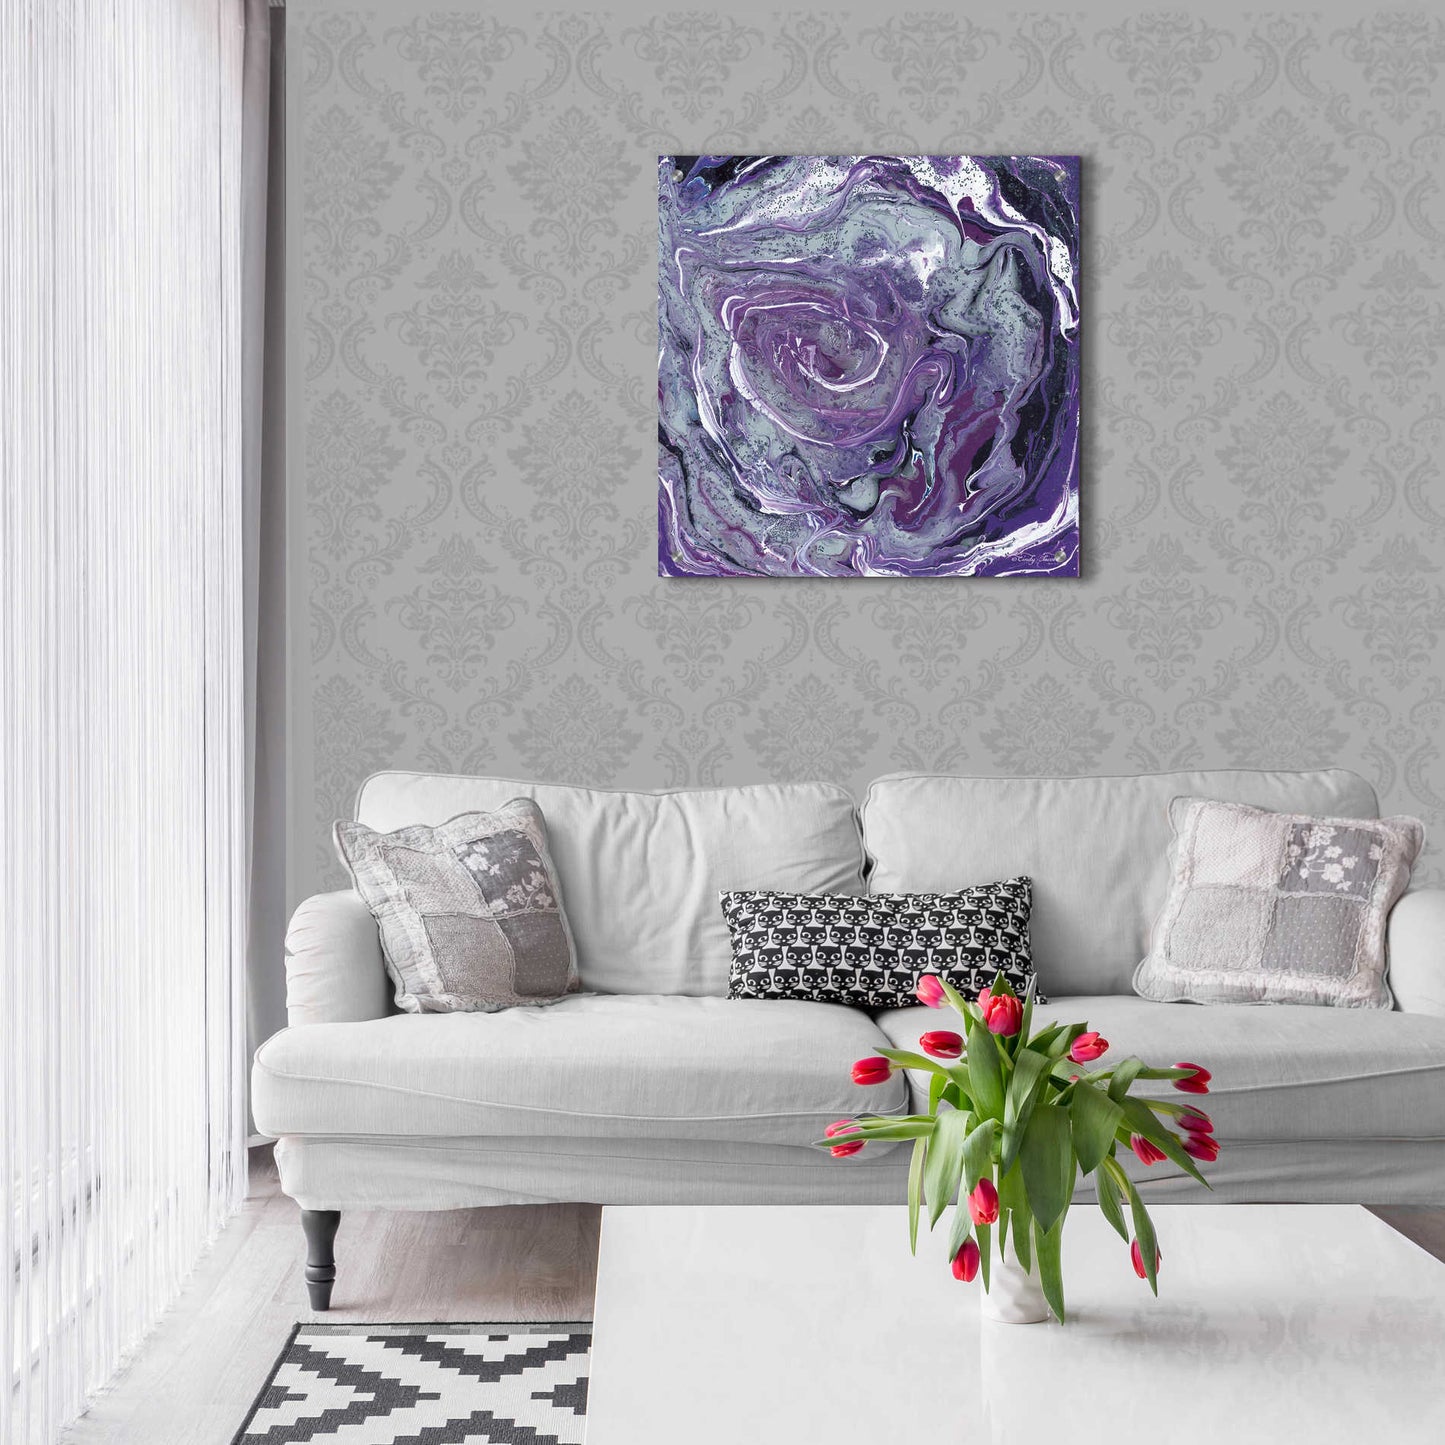 Epic Art 'Abstract in Purple II' by Cindy Jacobs, Acrylic Glass Wall Art,24x24